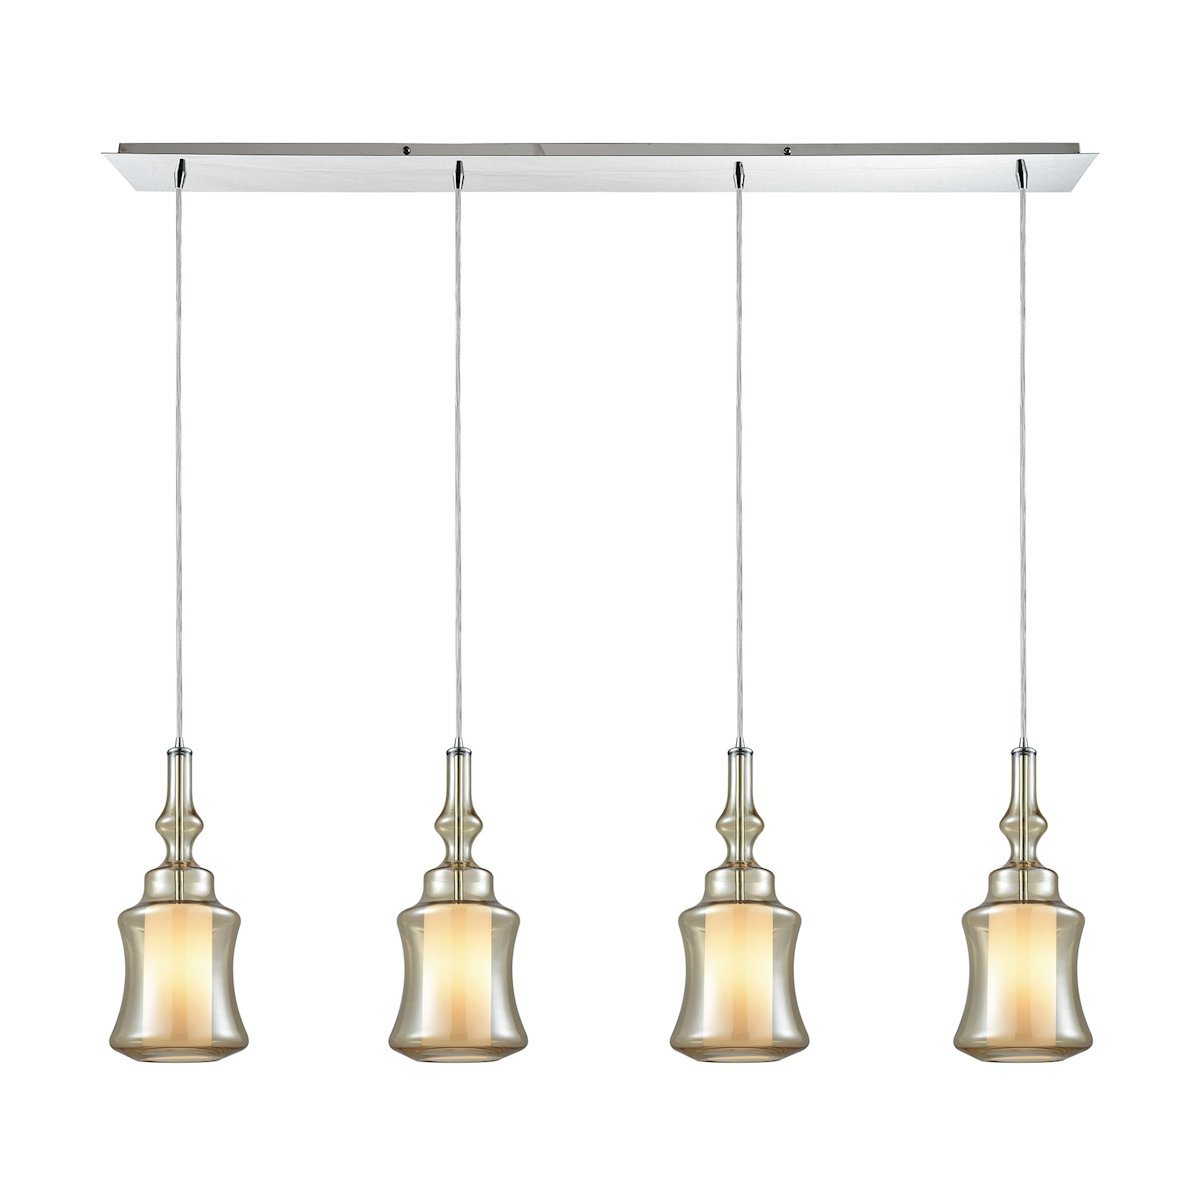 Alora 4 Light Linear Pan Pendant In Polished Chrome With Opal White Glass Inside Champagne Plated Glass Ceiling Elk Lighting 